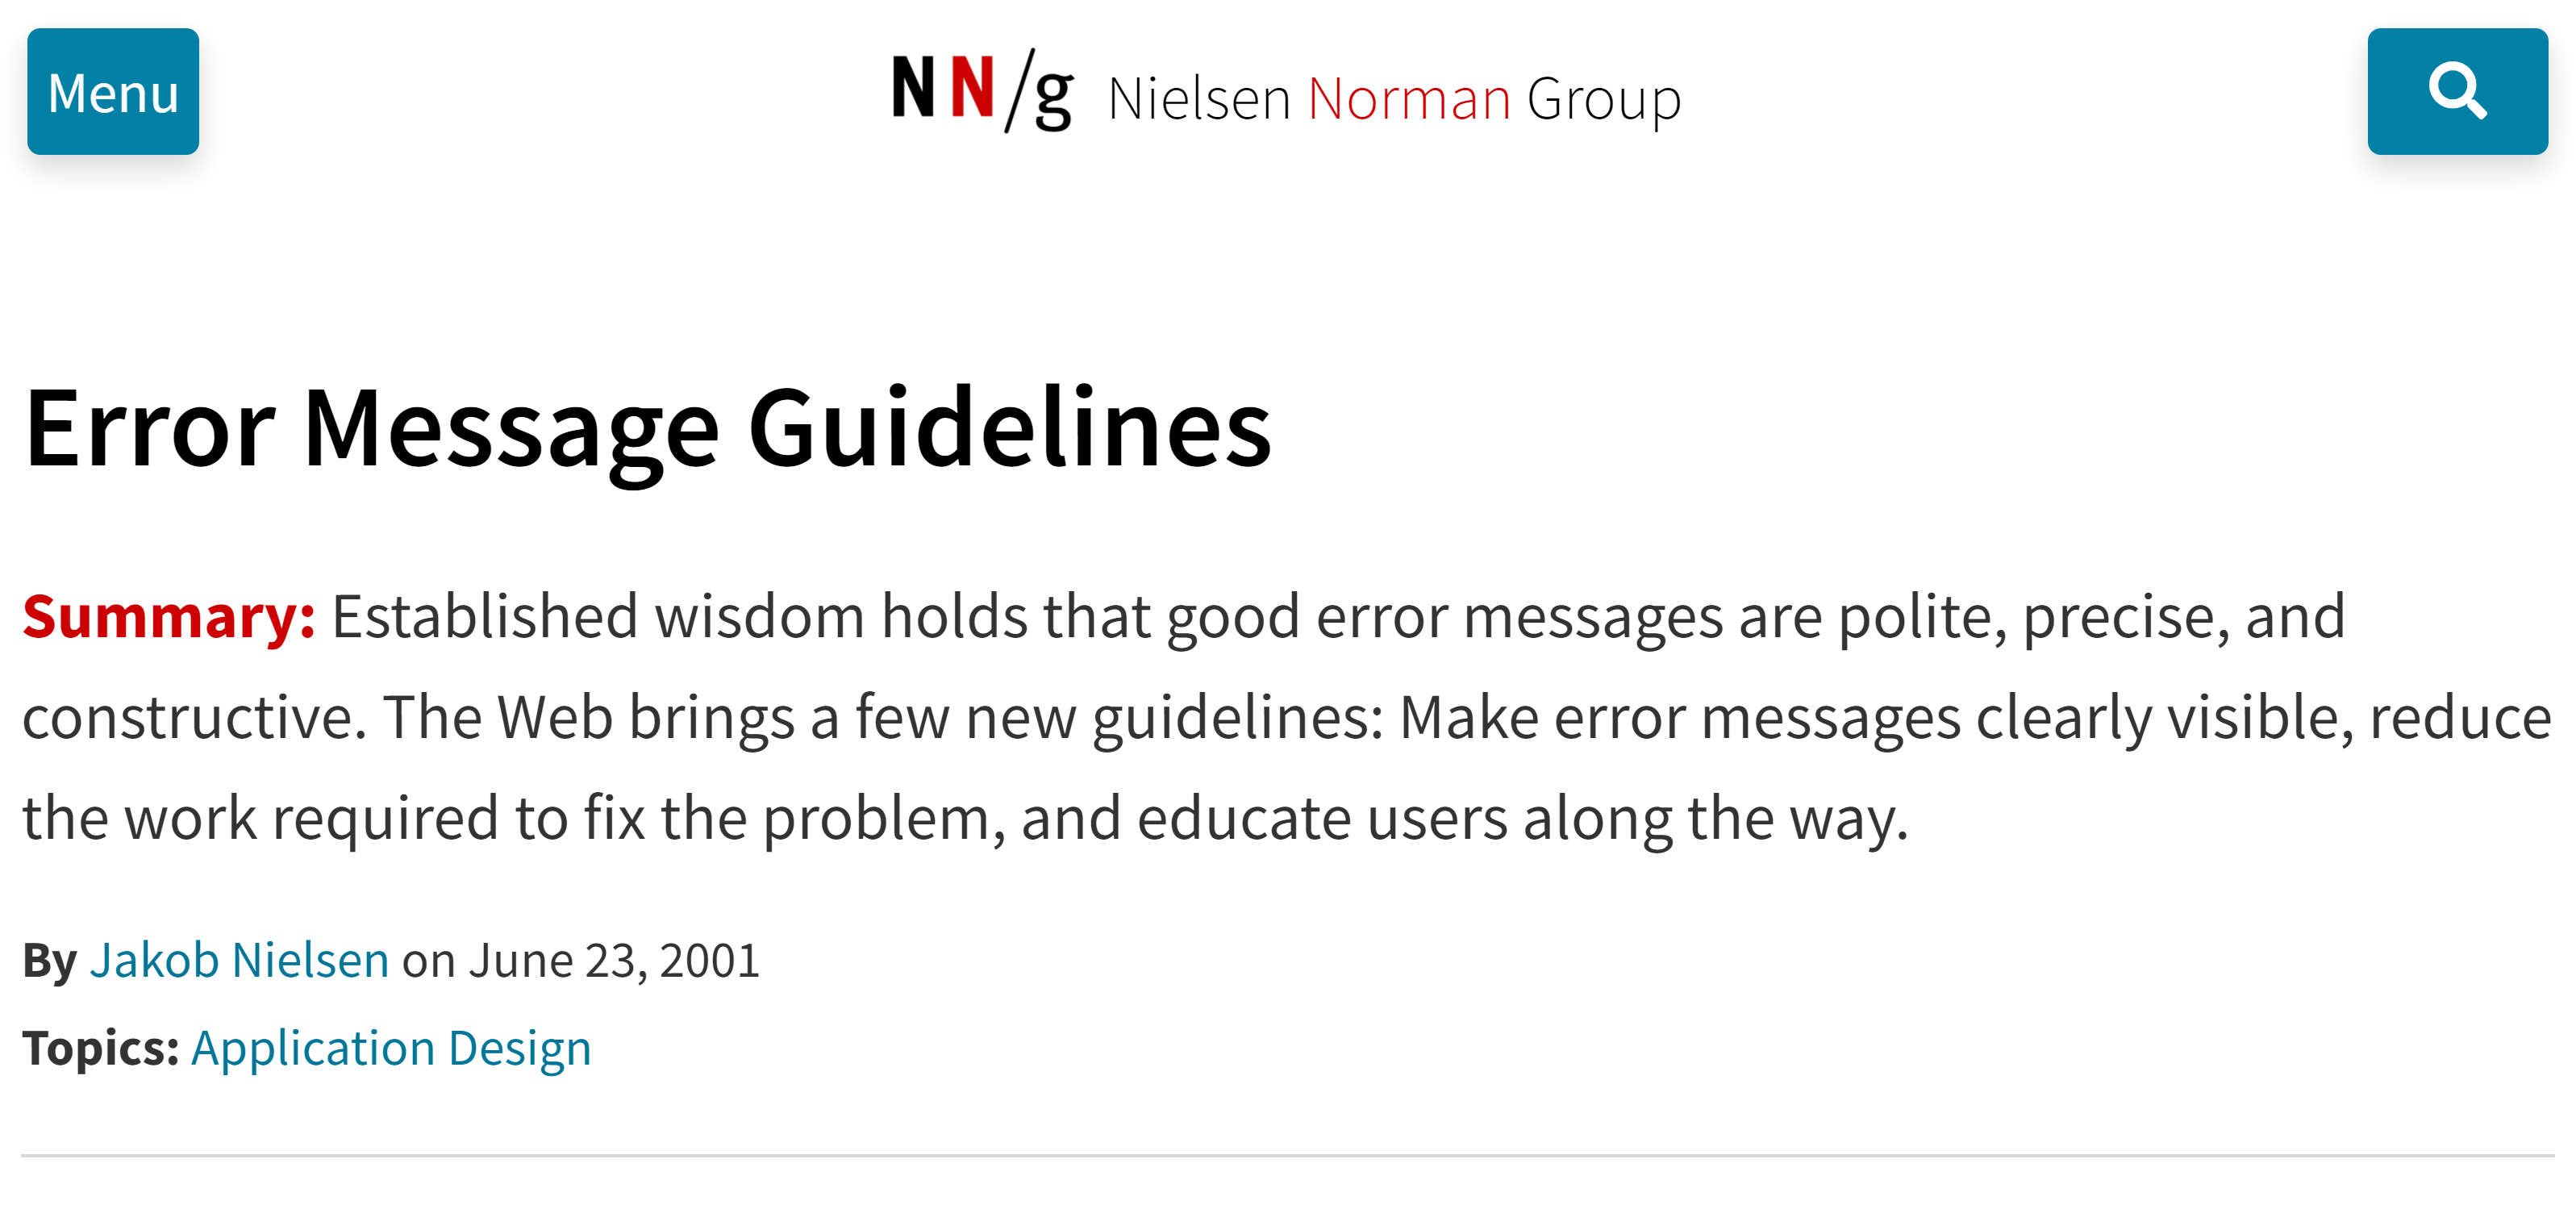 article titled Error message guidelines from the Nielson Norman Group